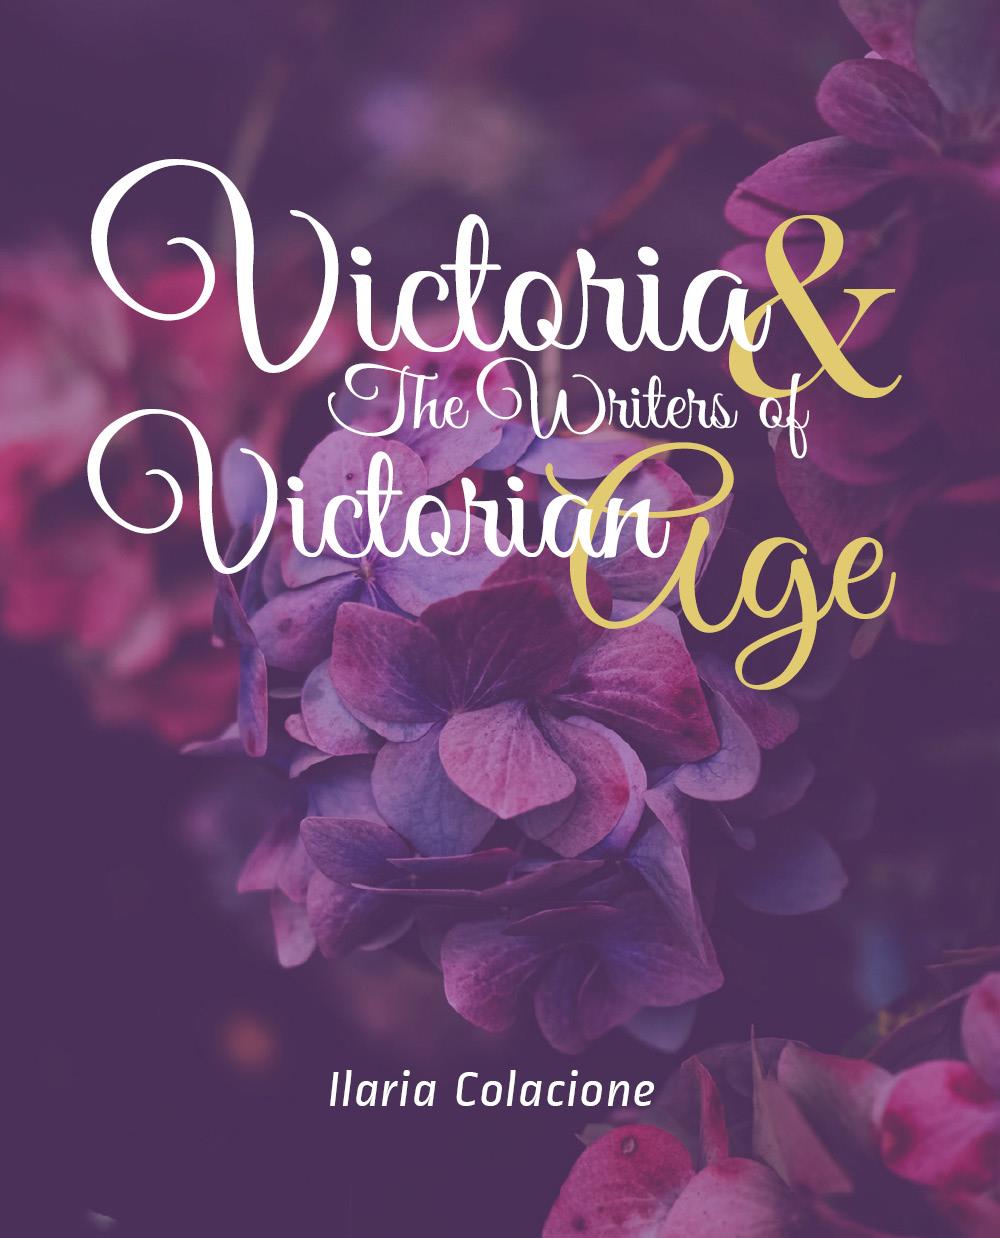 Victoria & The Writers of Victorian Age